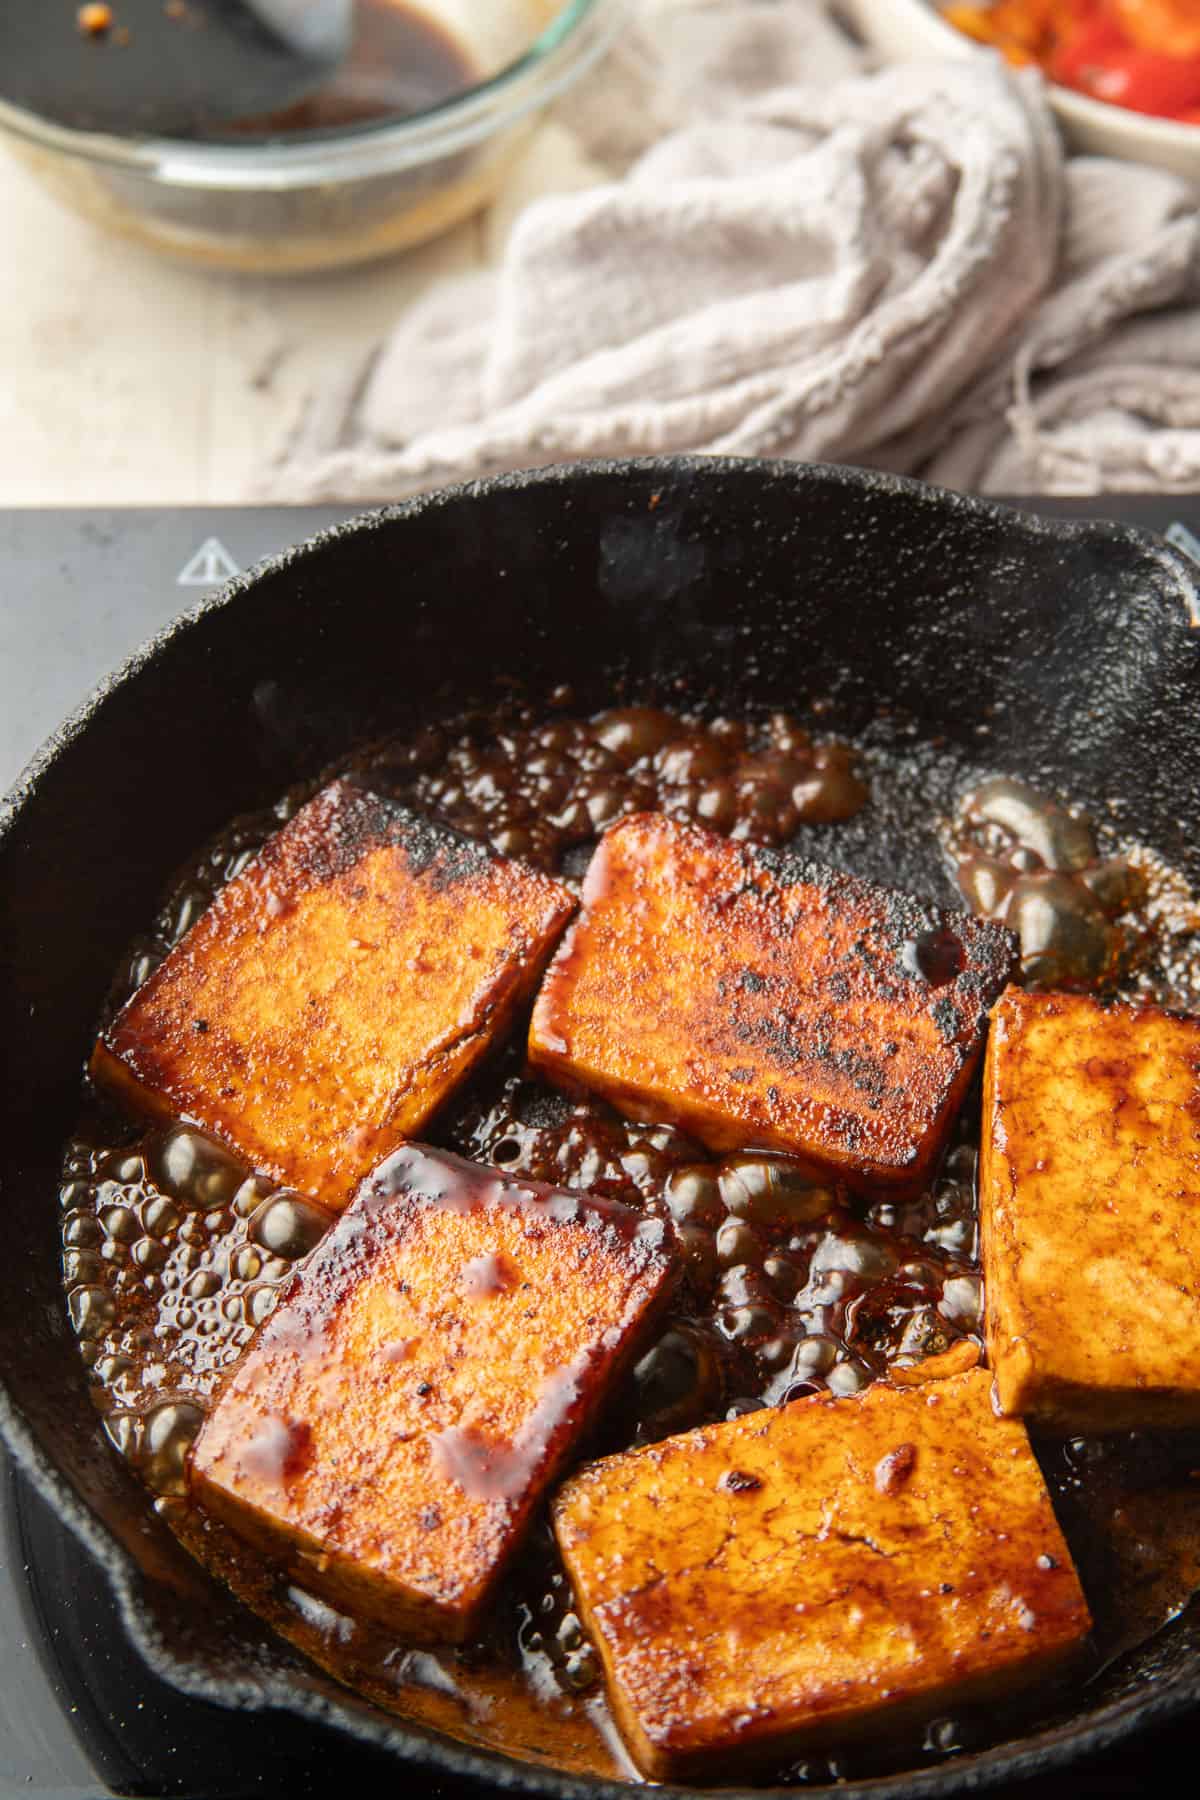 Tofu slabs cooking in a balsamic reduction in a skillet.